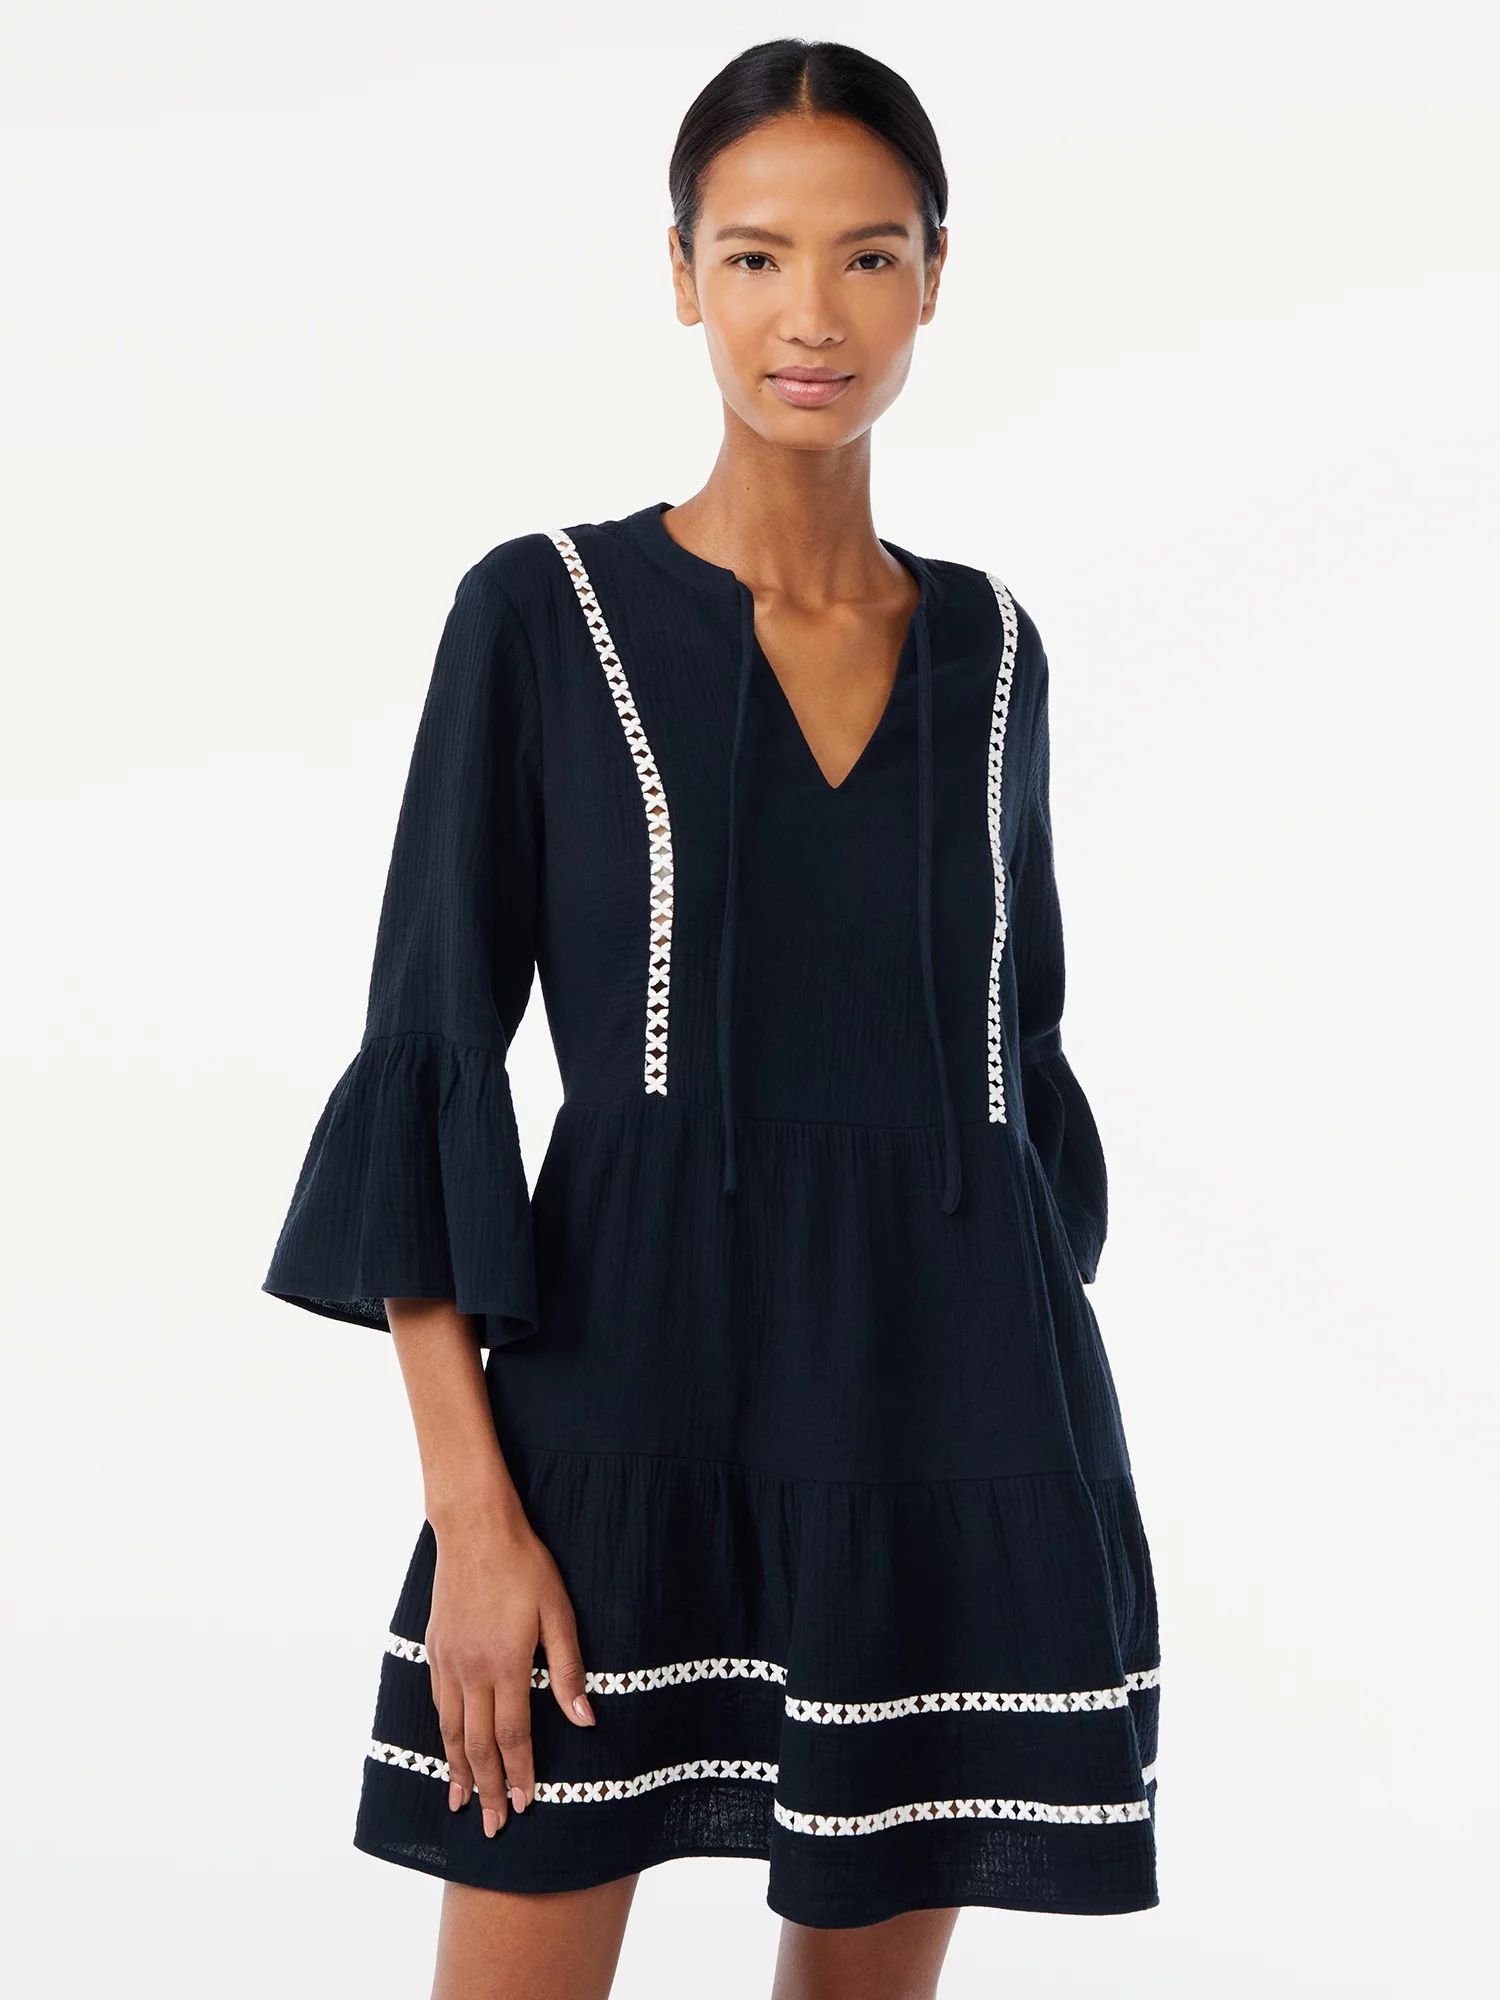 Scoop Women's Lace Trimmed Mini Dress with ¾ Sleeves | Walmart (US)